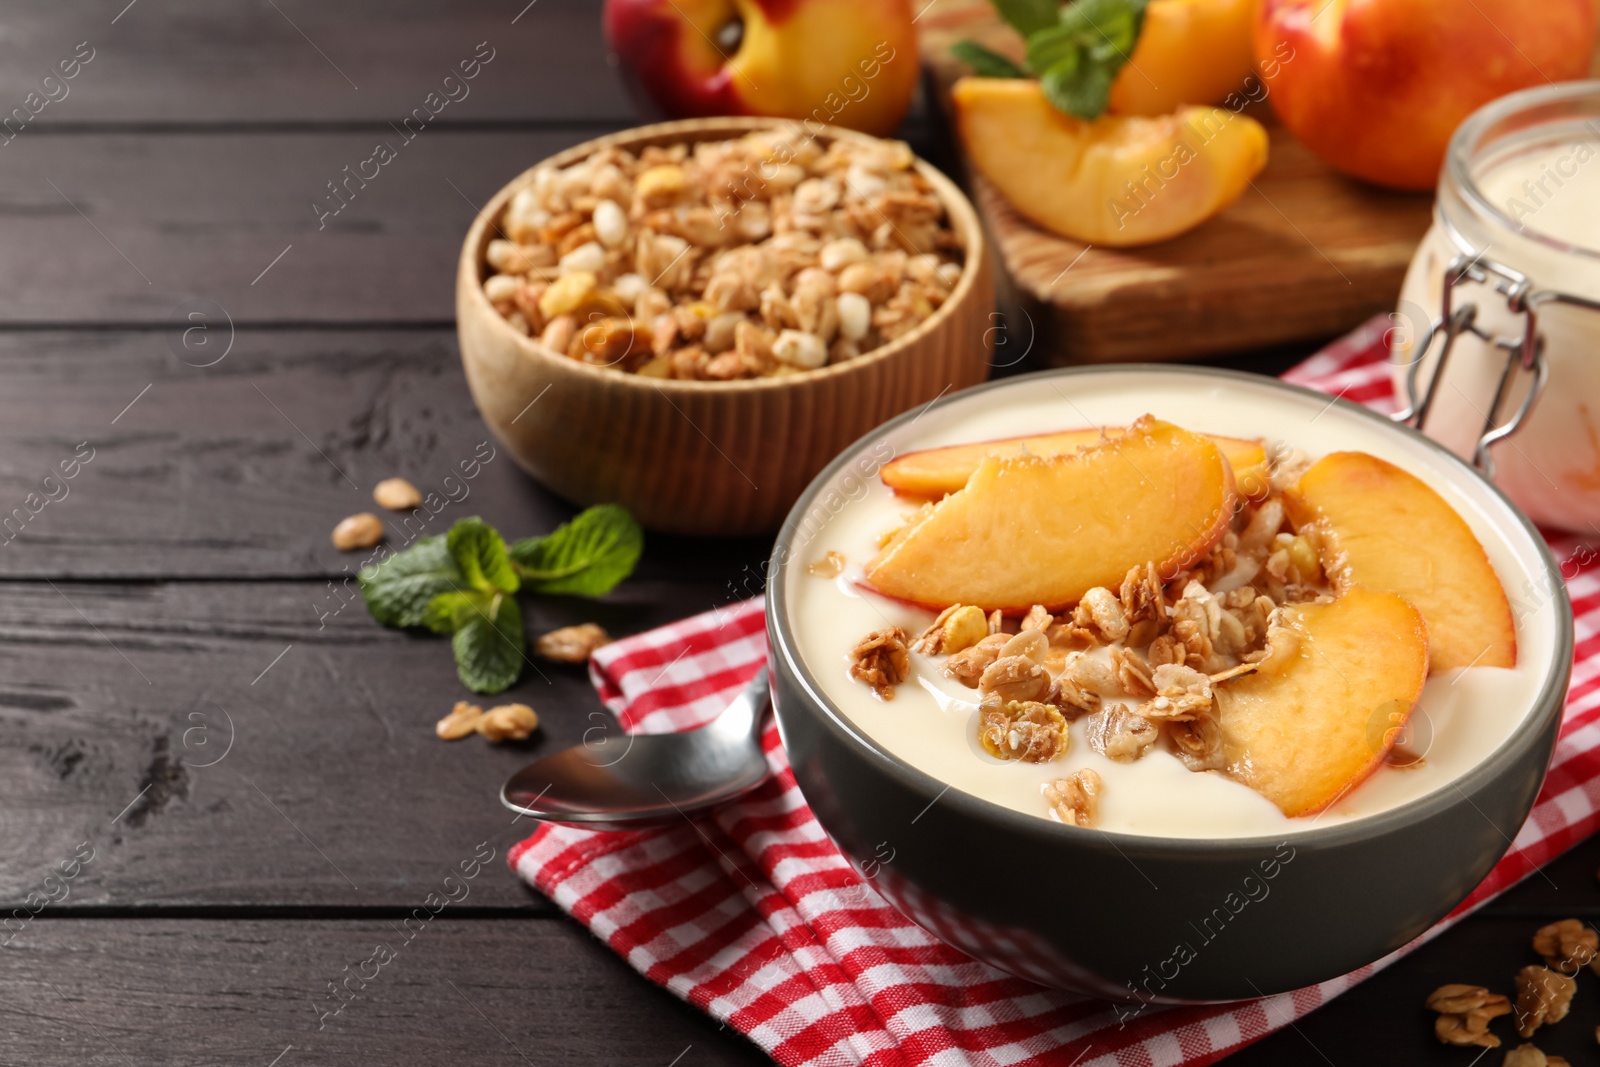 Photo of Tasty peach yogurt with granola and pieces of fruits in bowl on wooden table, space for text